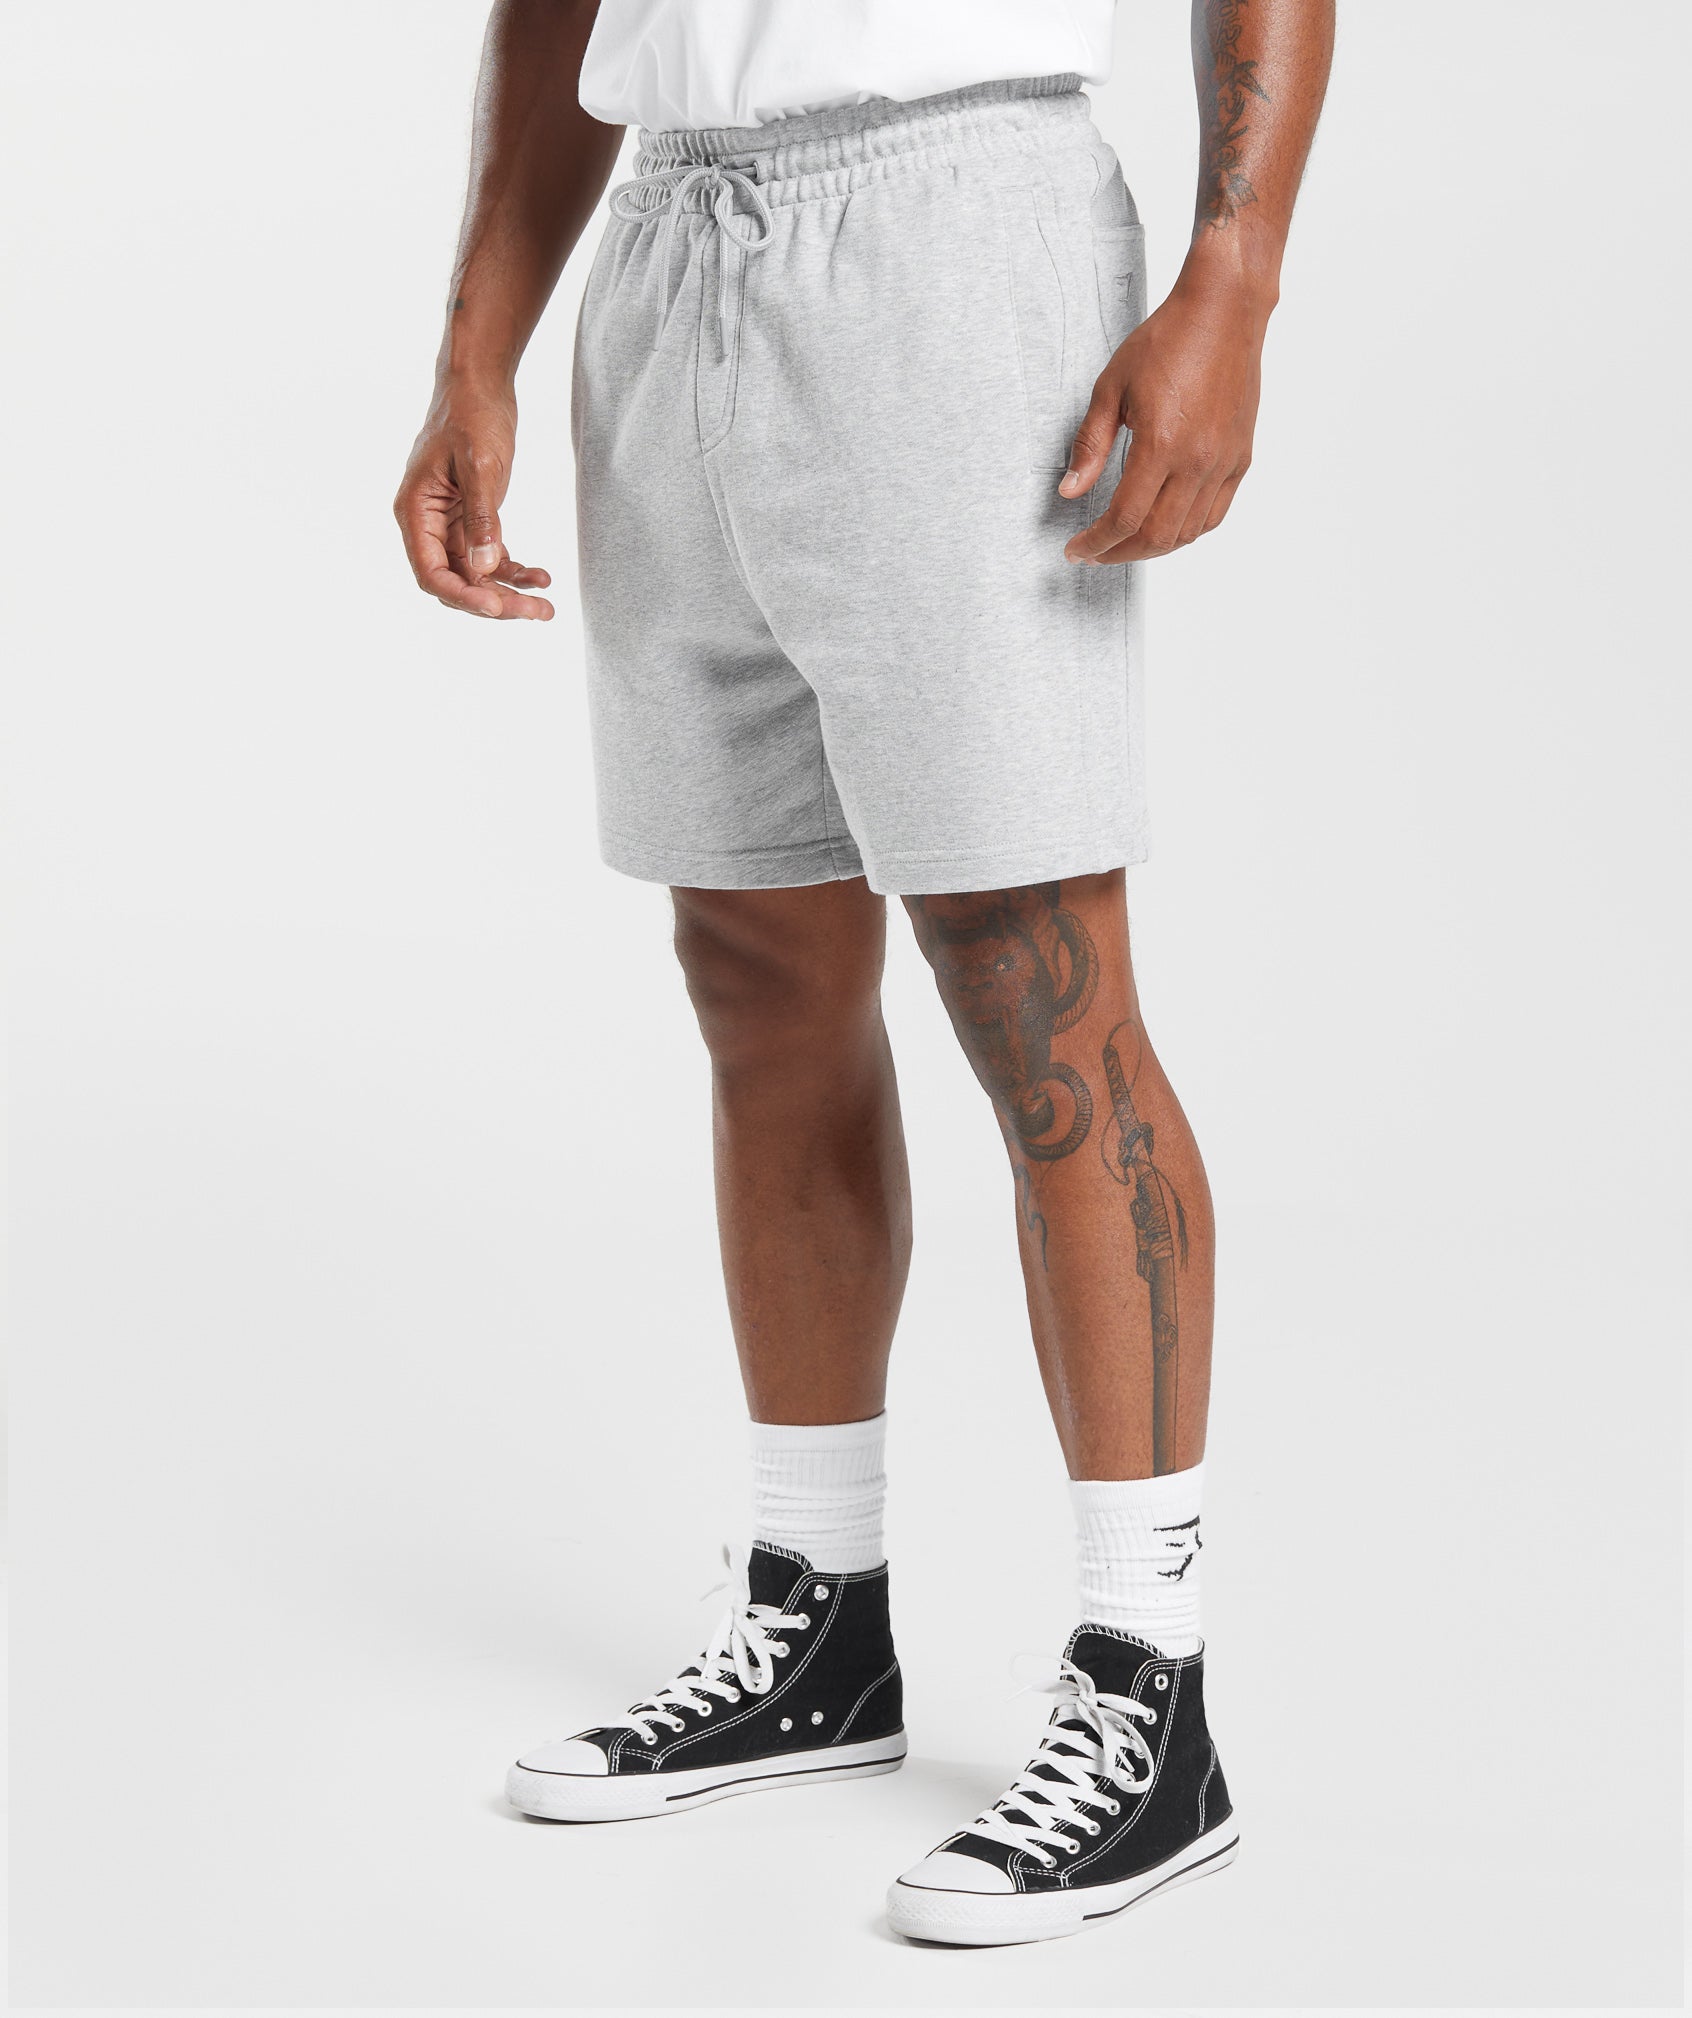 Rest Day Essentials Shorts in Light Grey Core Marl - view 4